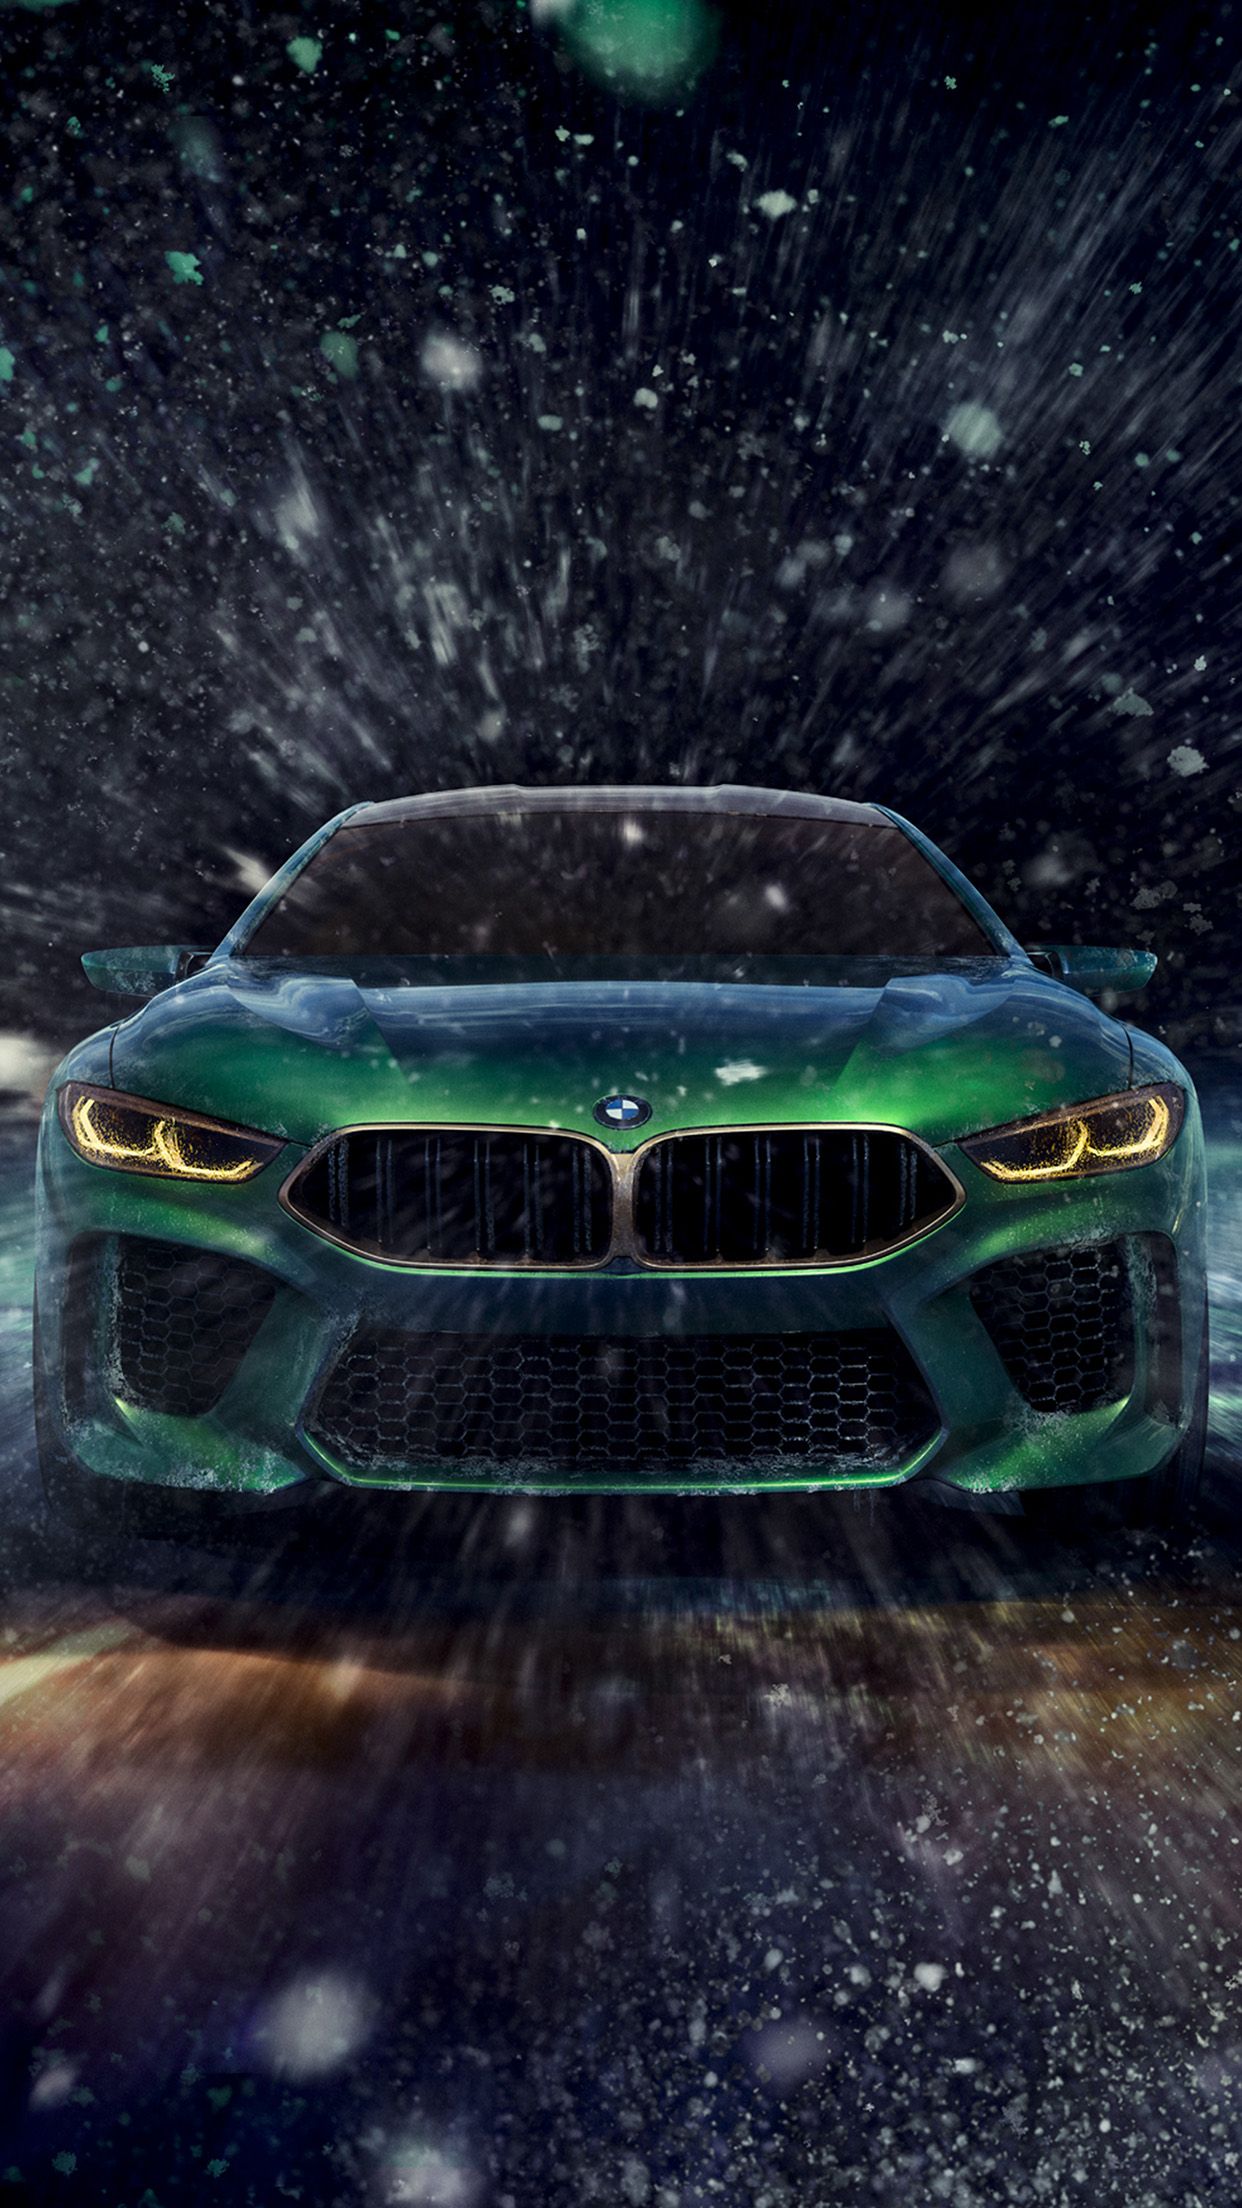 IPhone wallpaper of the BMW M8 Gran Coupe in the snow - BMW